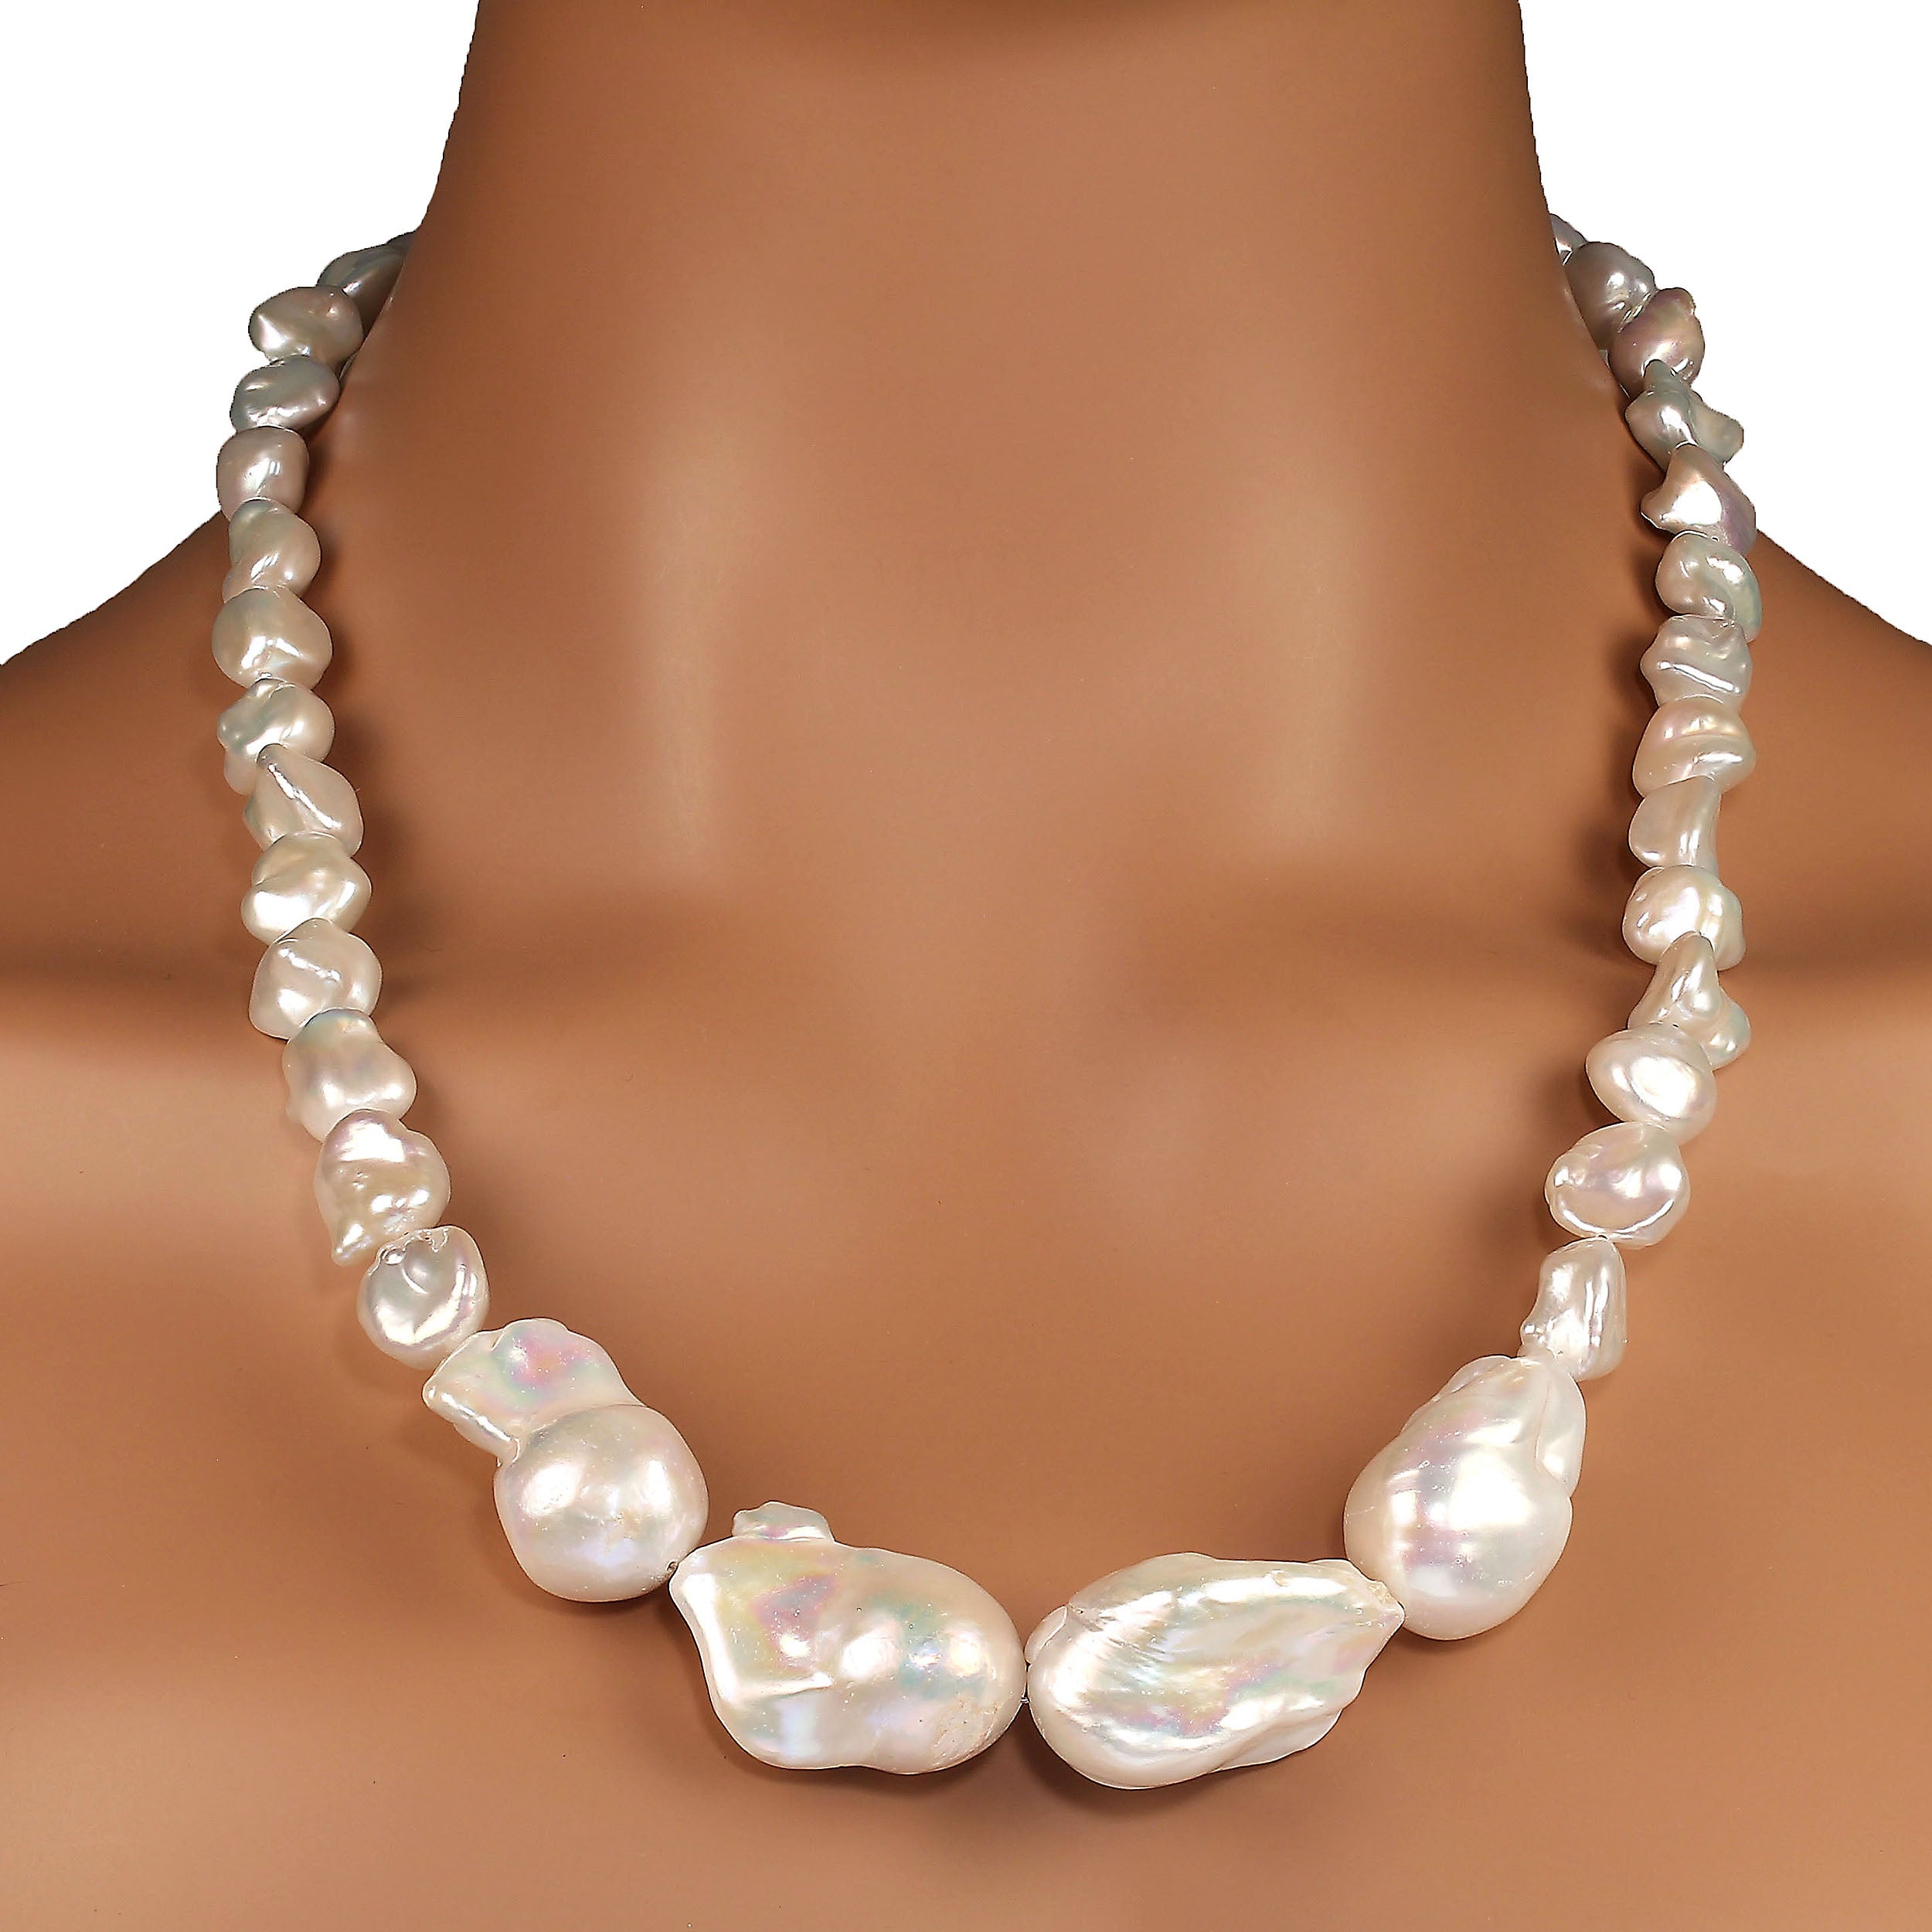 AJD 23 Inch White Pearl Statement necklace with Four Front Focal Pearls. 